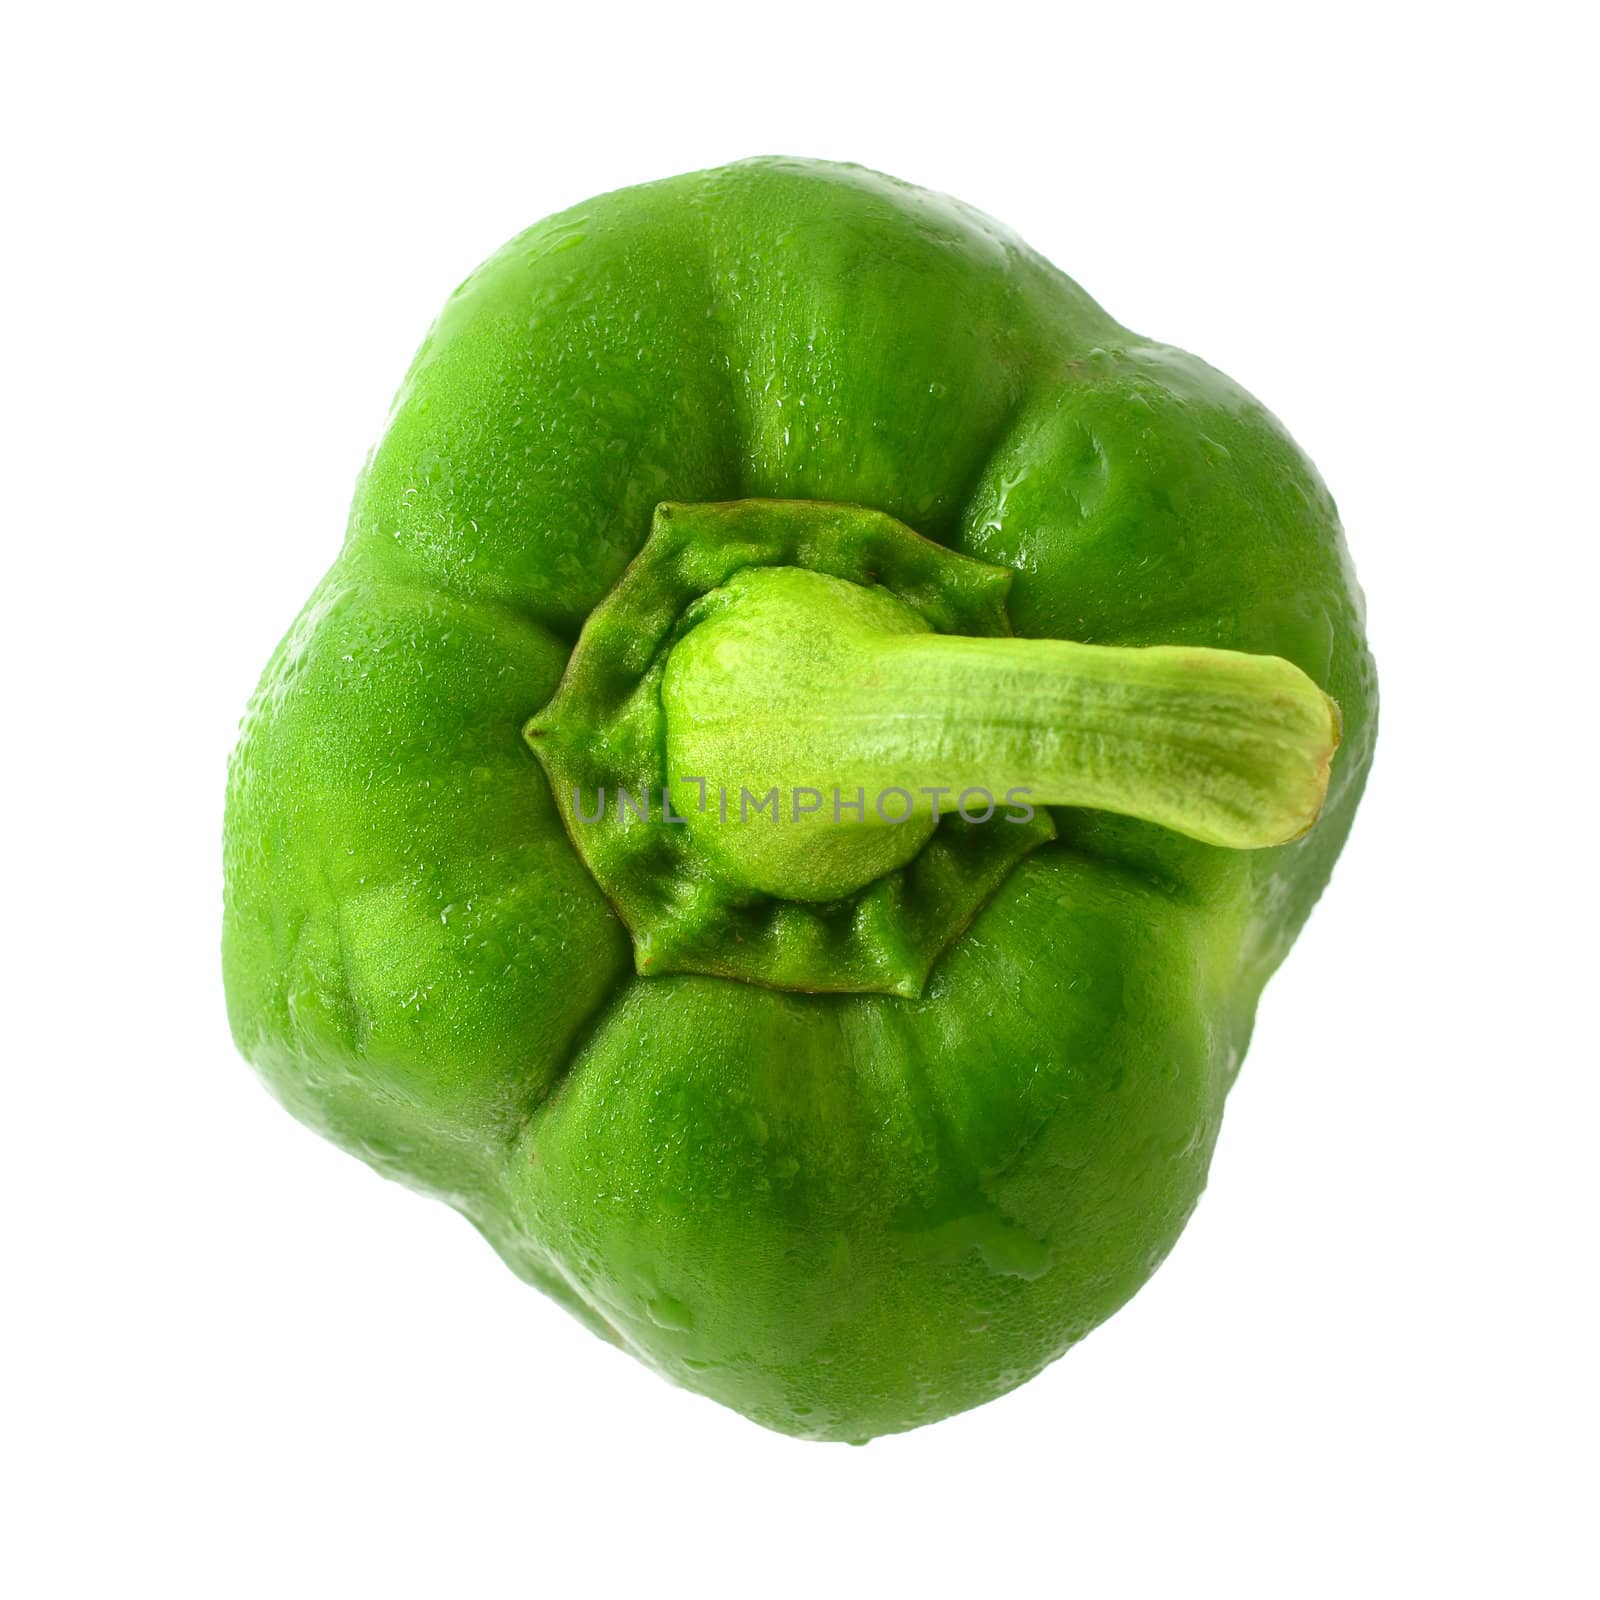 Green Pepper with clipping path